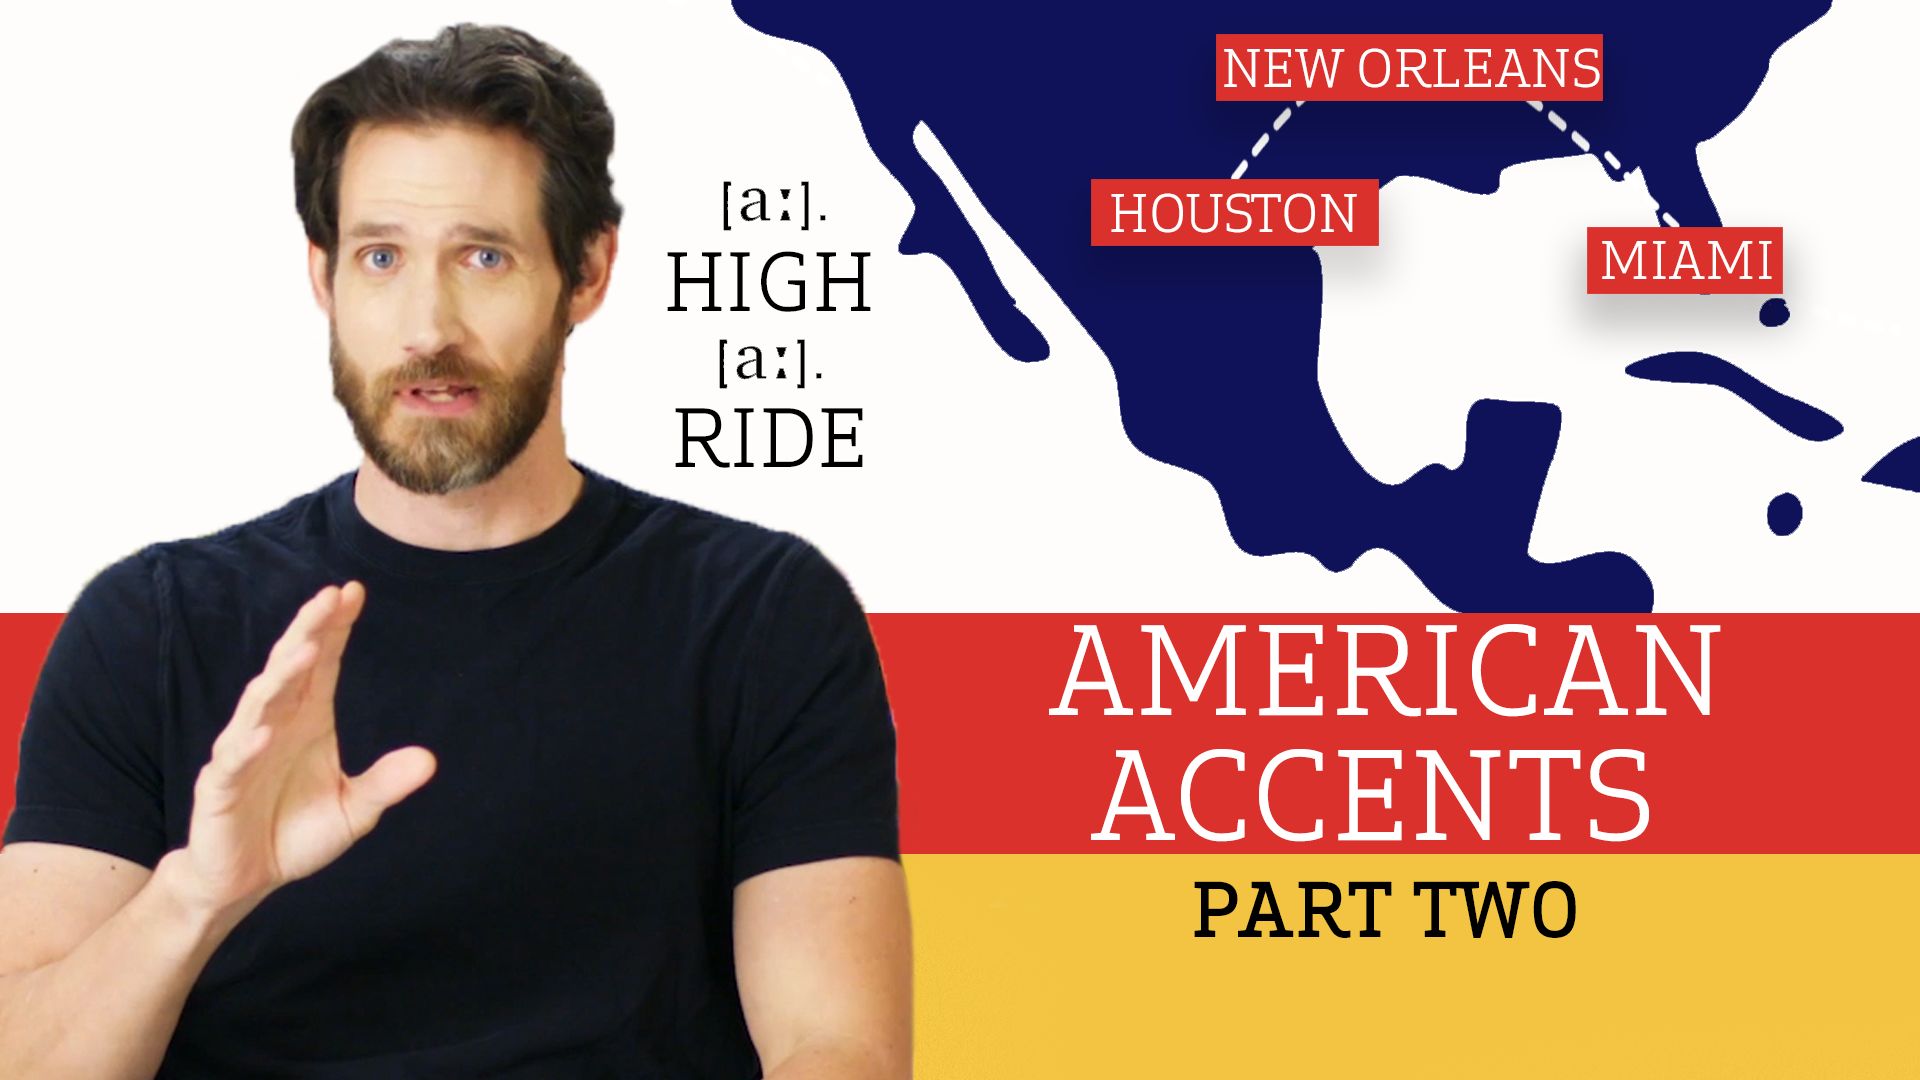 Watch Accent Expert Gives a Tour of U.S. Accents - (Part Two